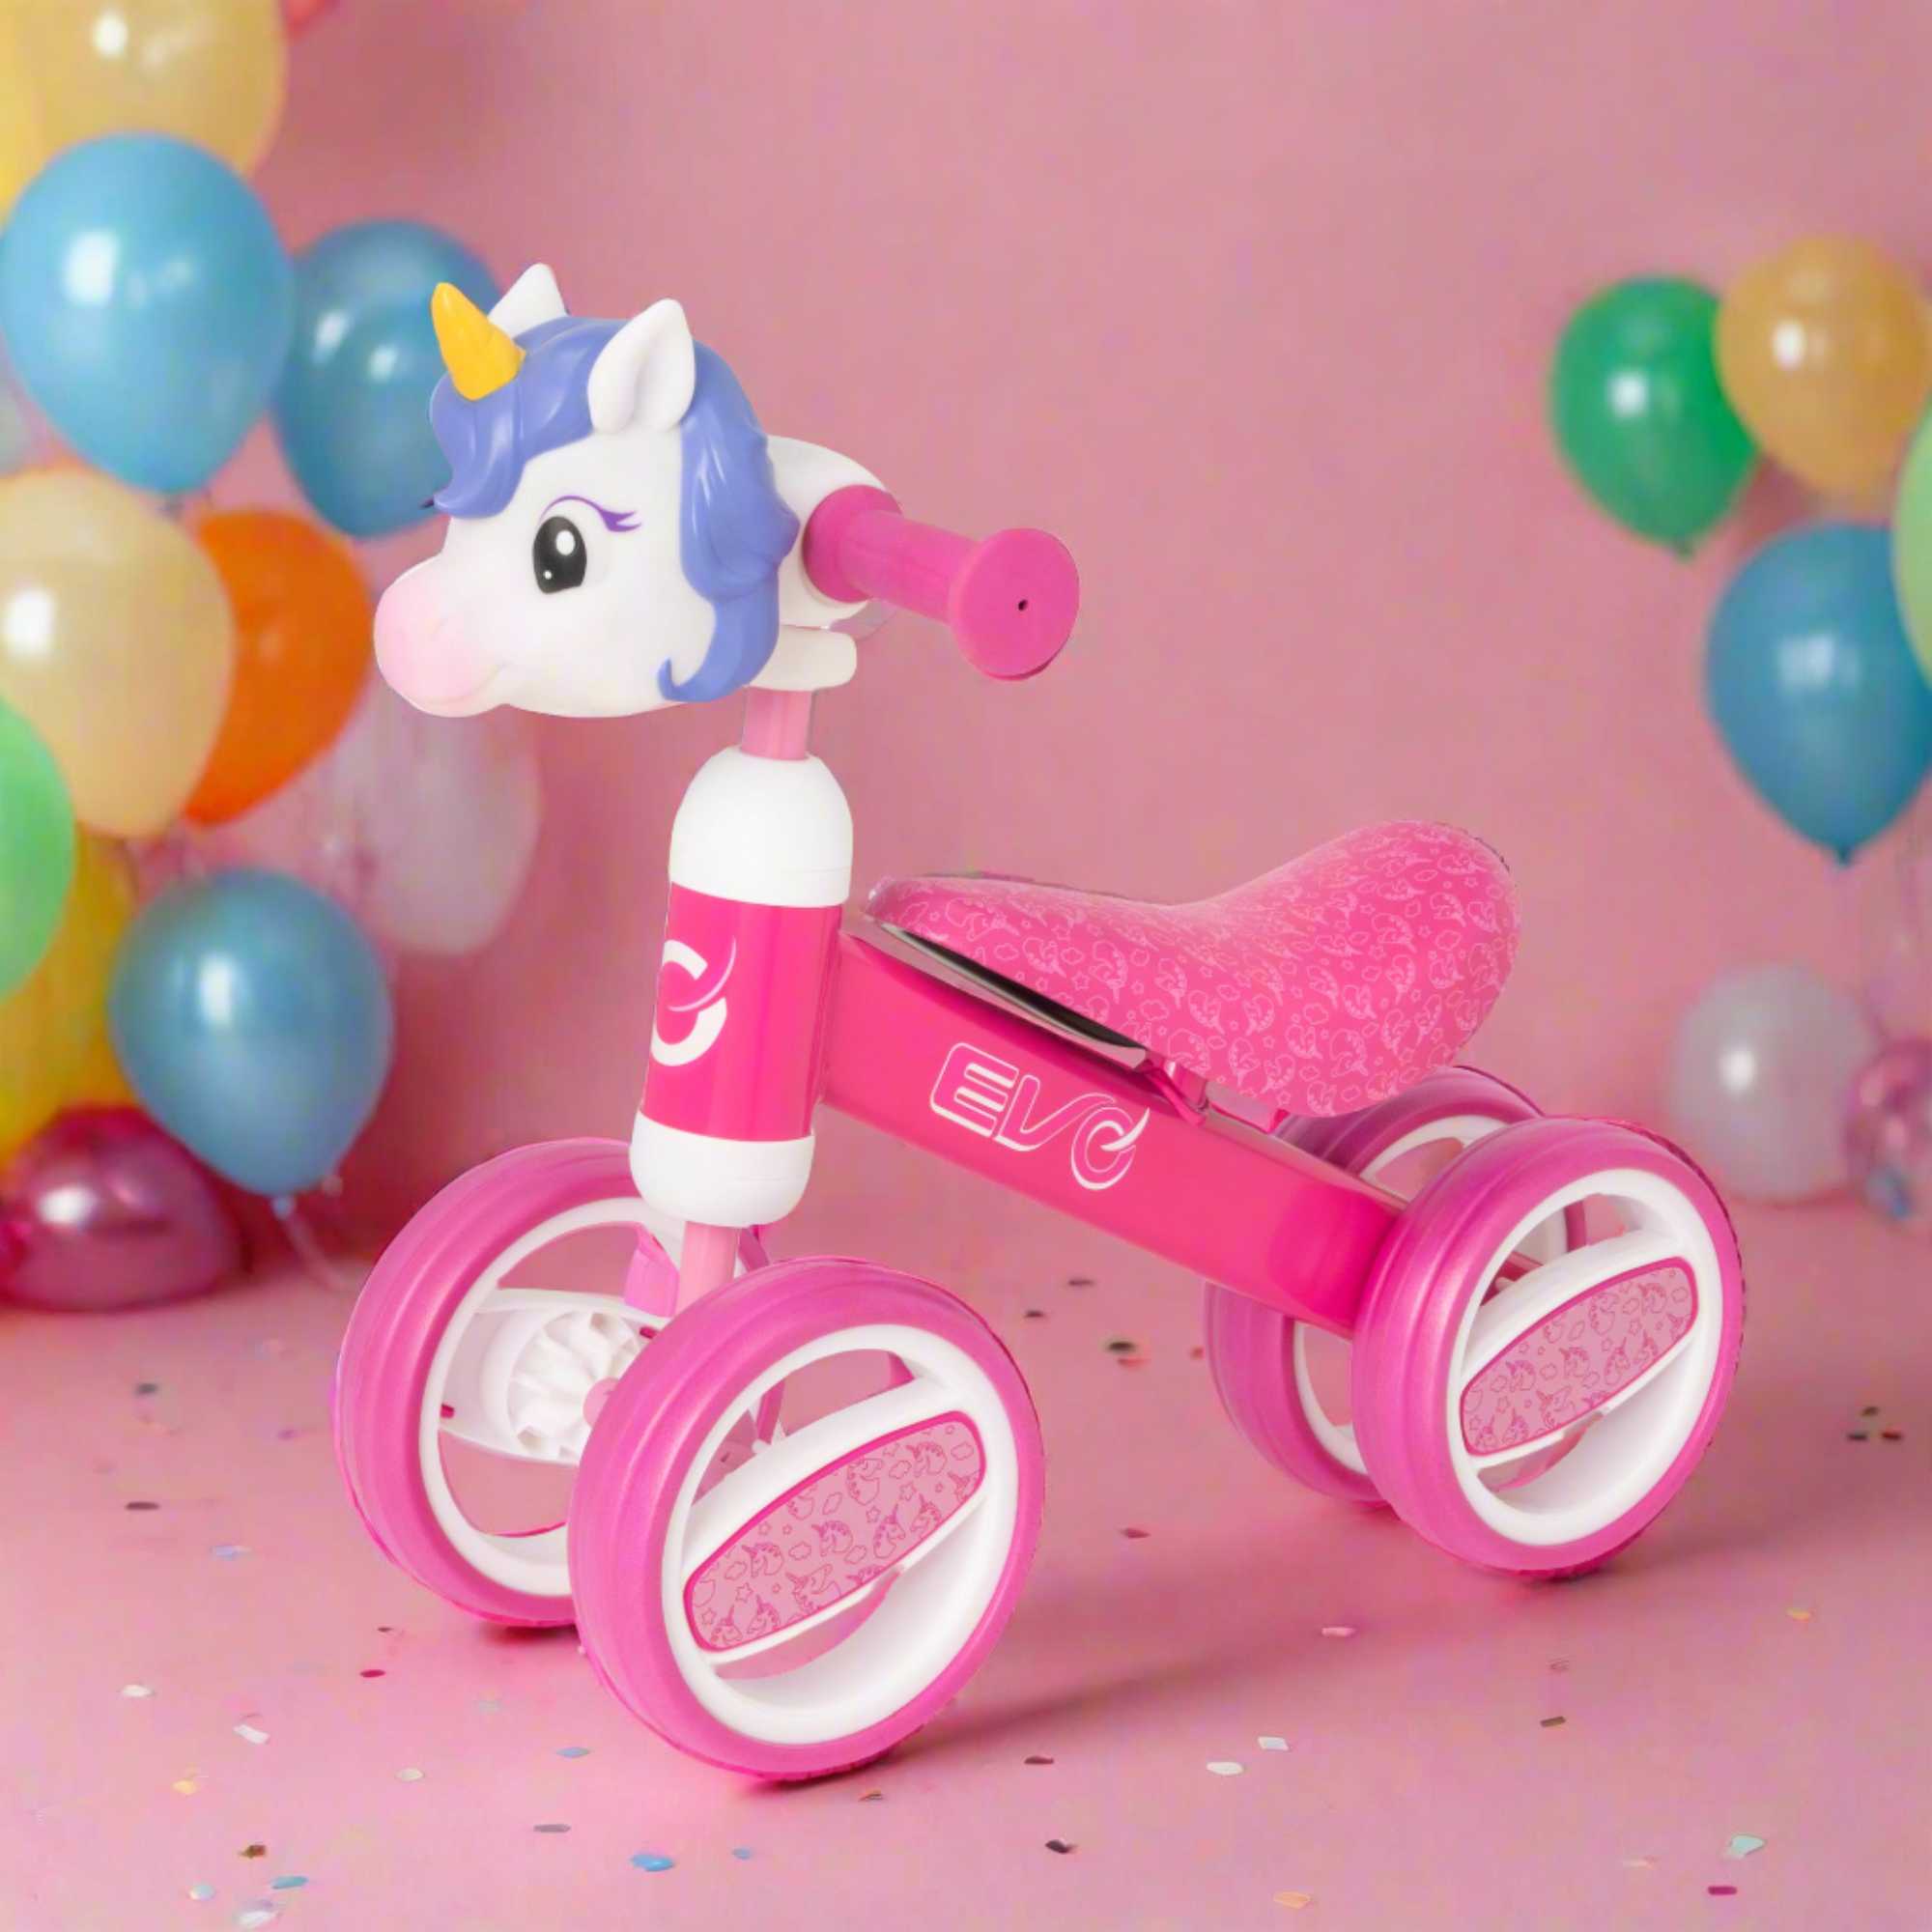 Fun and colourful EVO Character Heads Bobble Bike featuring adorable Unicorn and Dino designs for kids, perfect for teaching children balance and coordination.